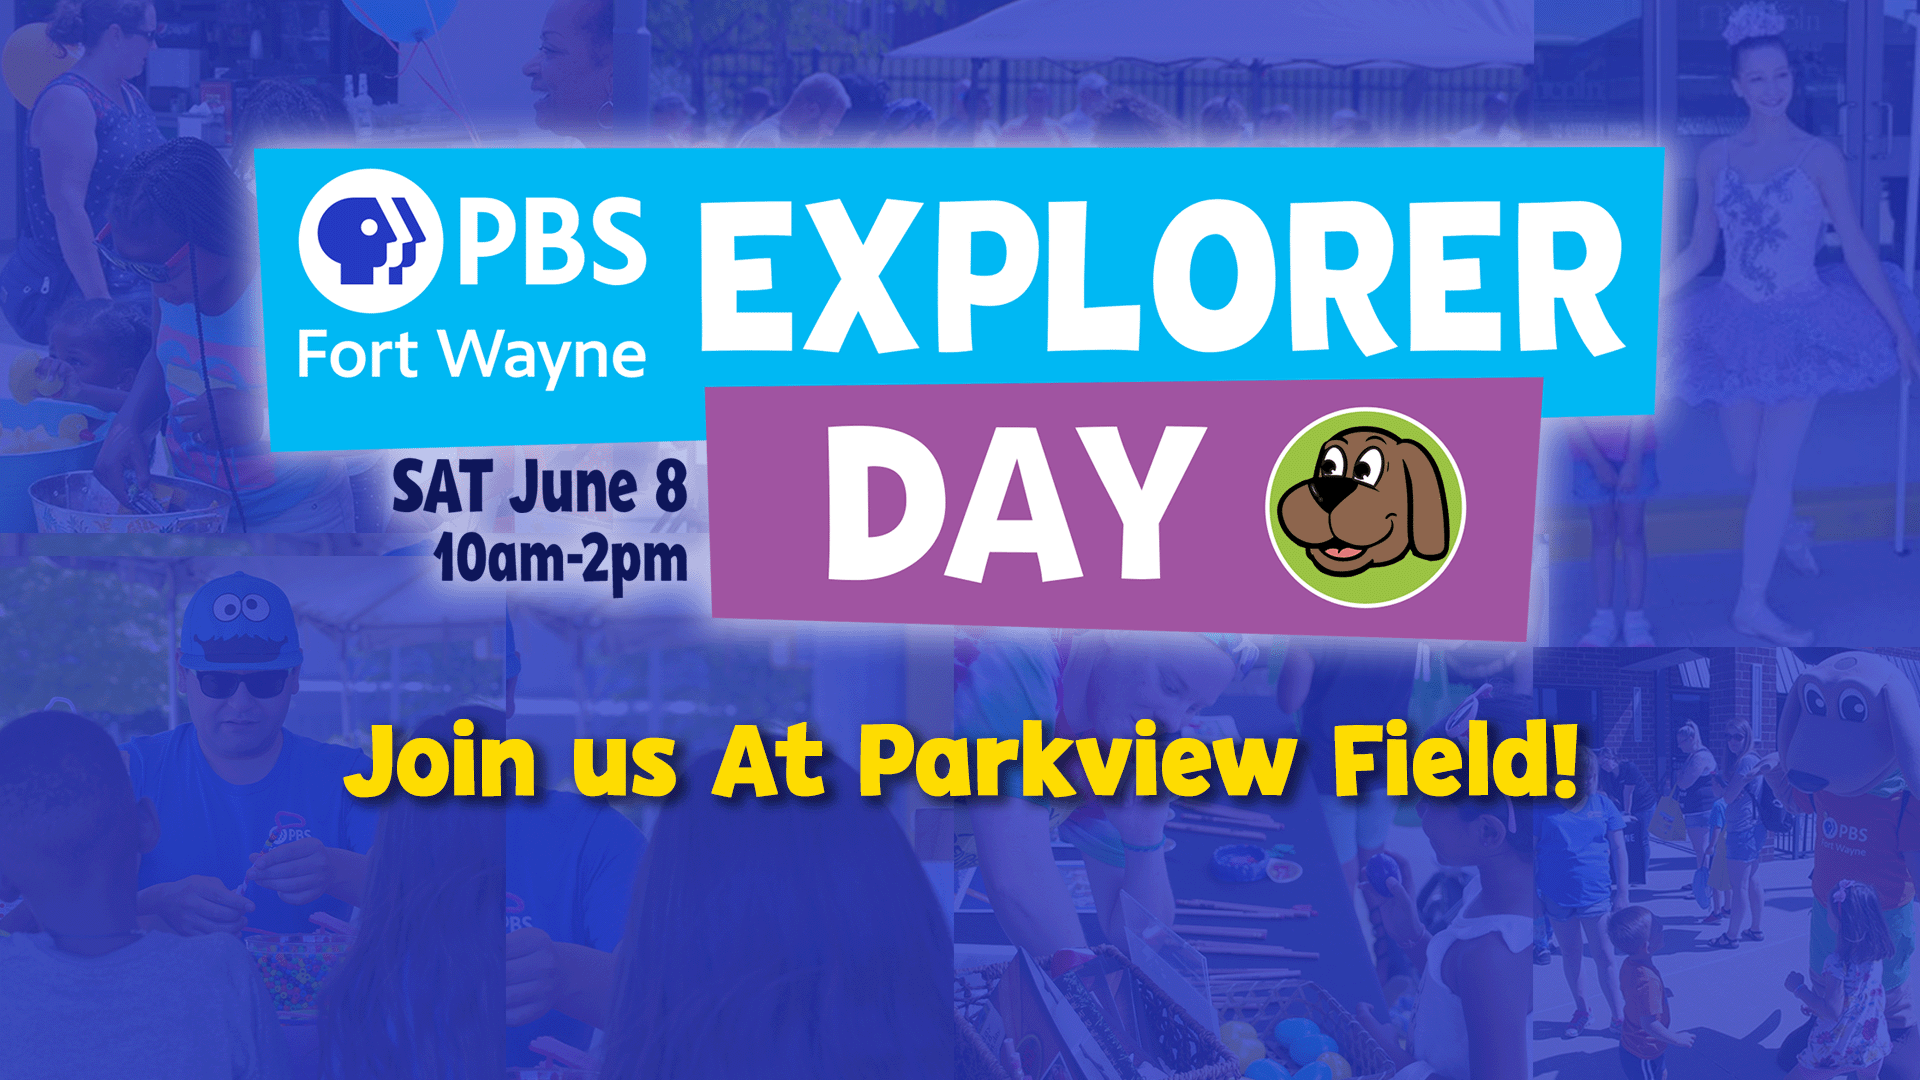 Save the Date for Explorer Day!